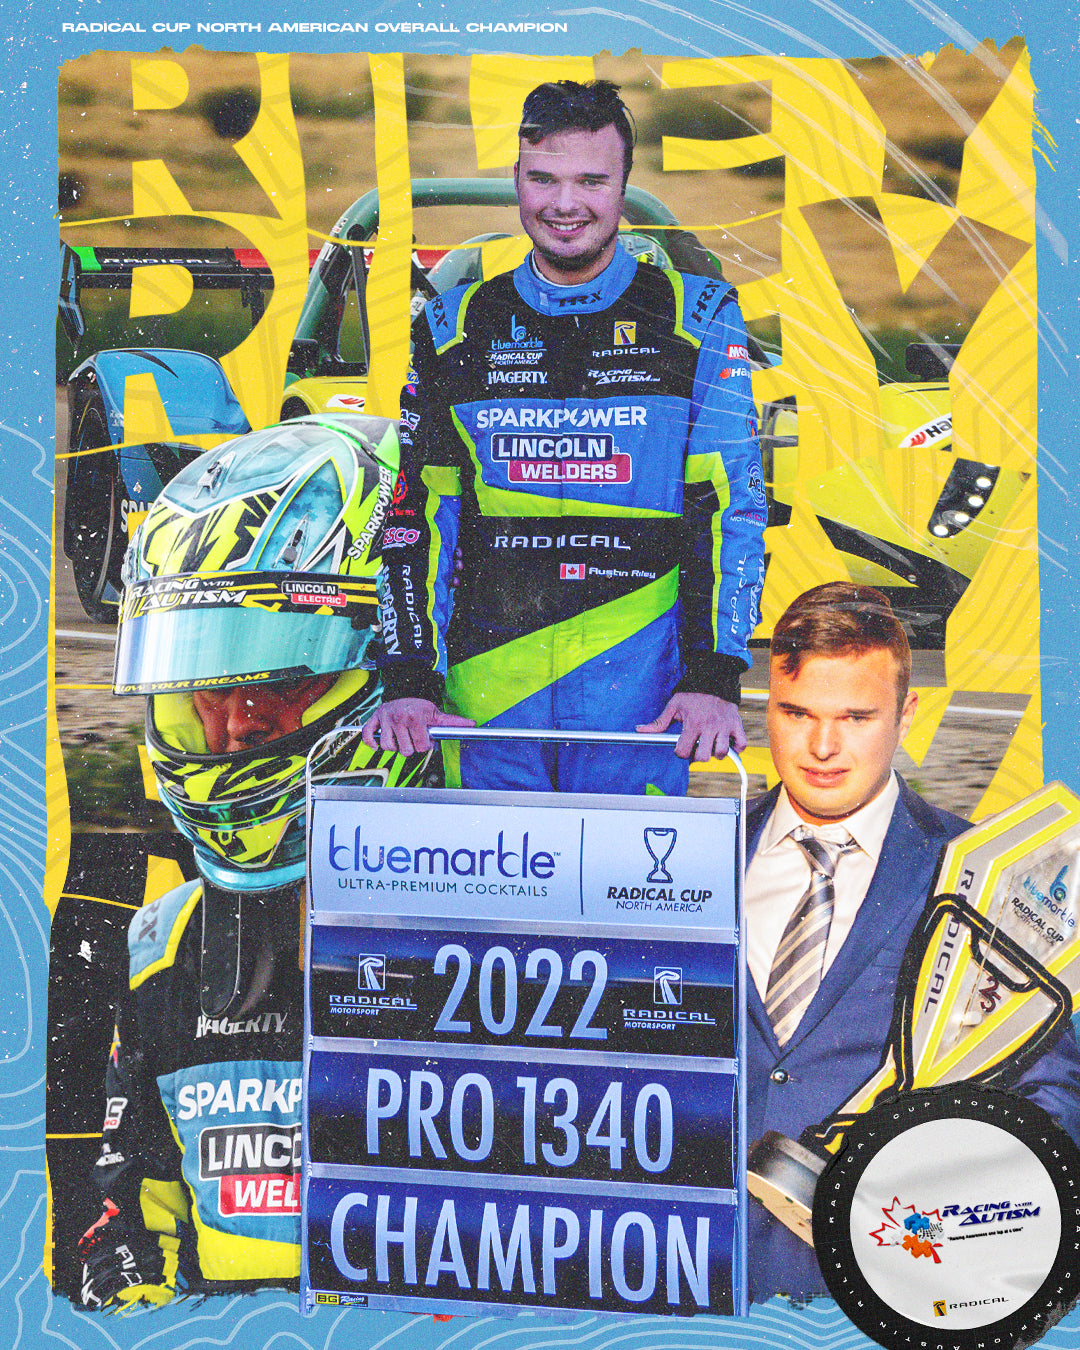 Austin Riley is Your 2022 Blue Marble Radical Cup North America Pro 1340 Champion